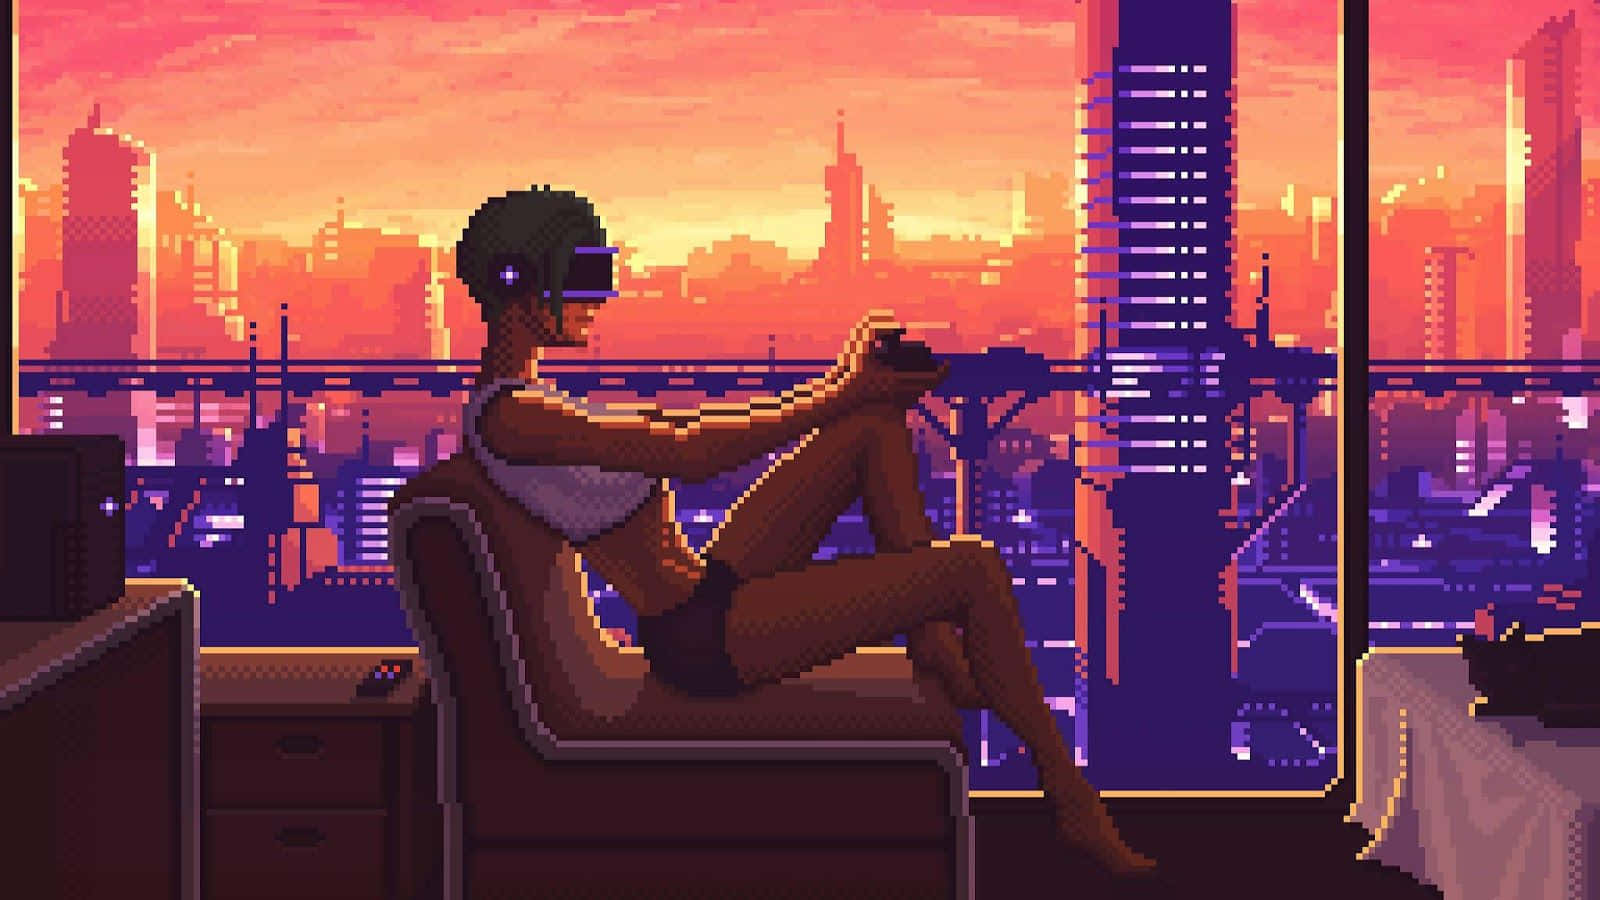 Cyberpunk-inspired Pixel Art With A Dash Of Color Background